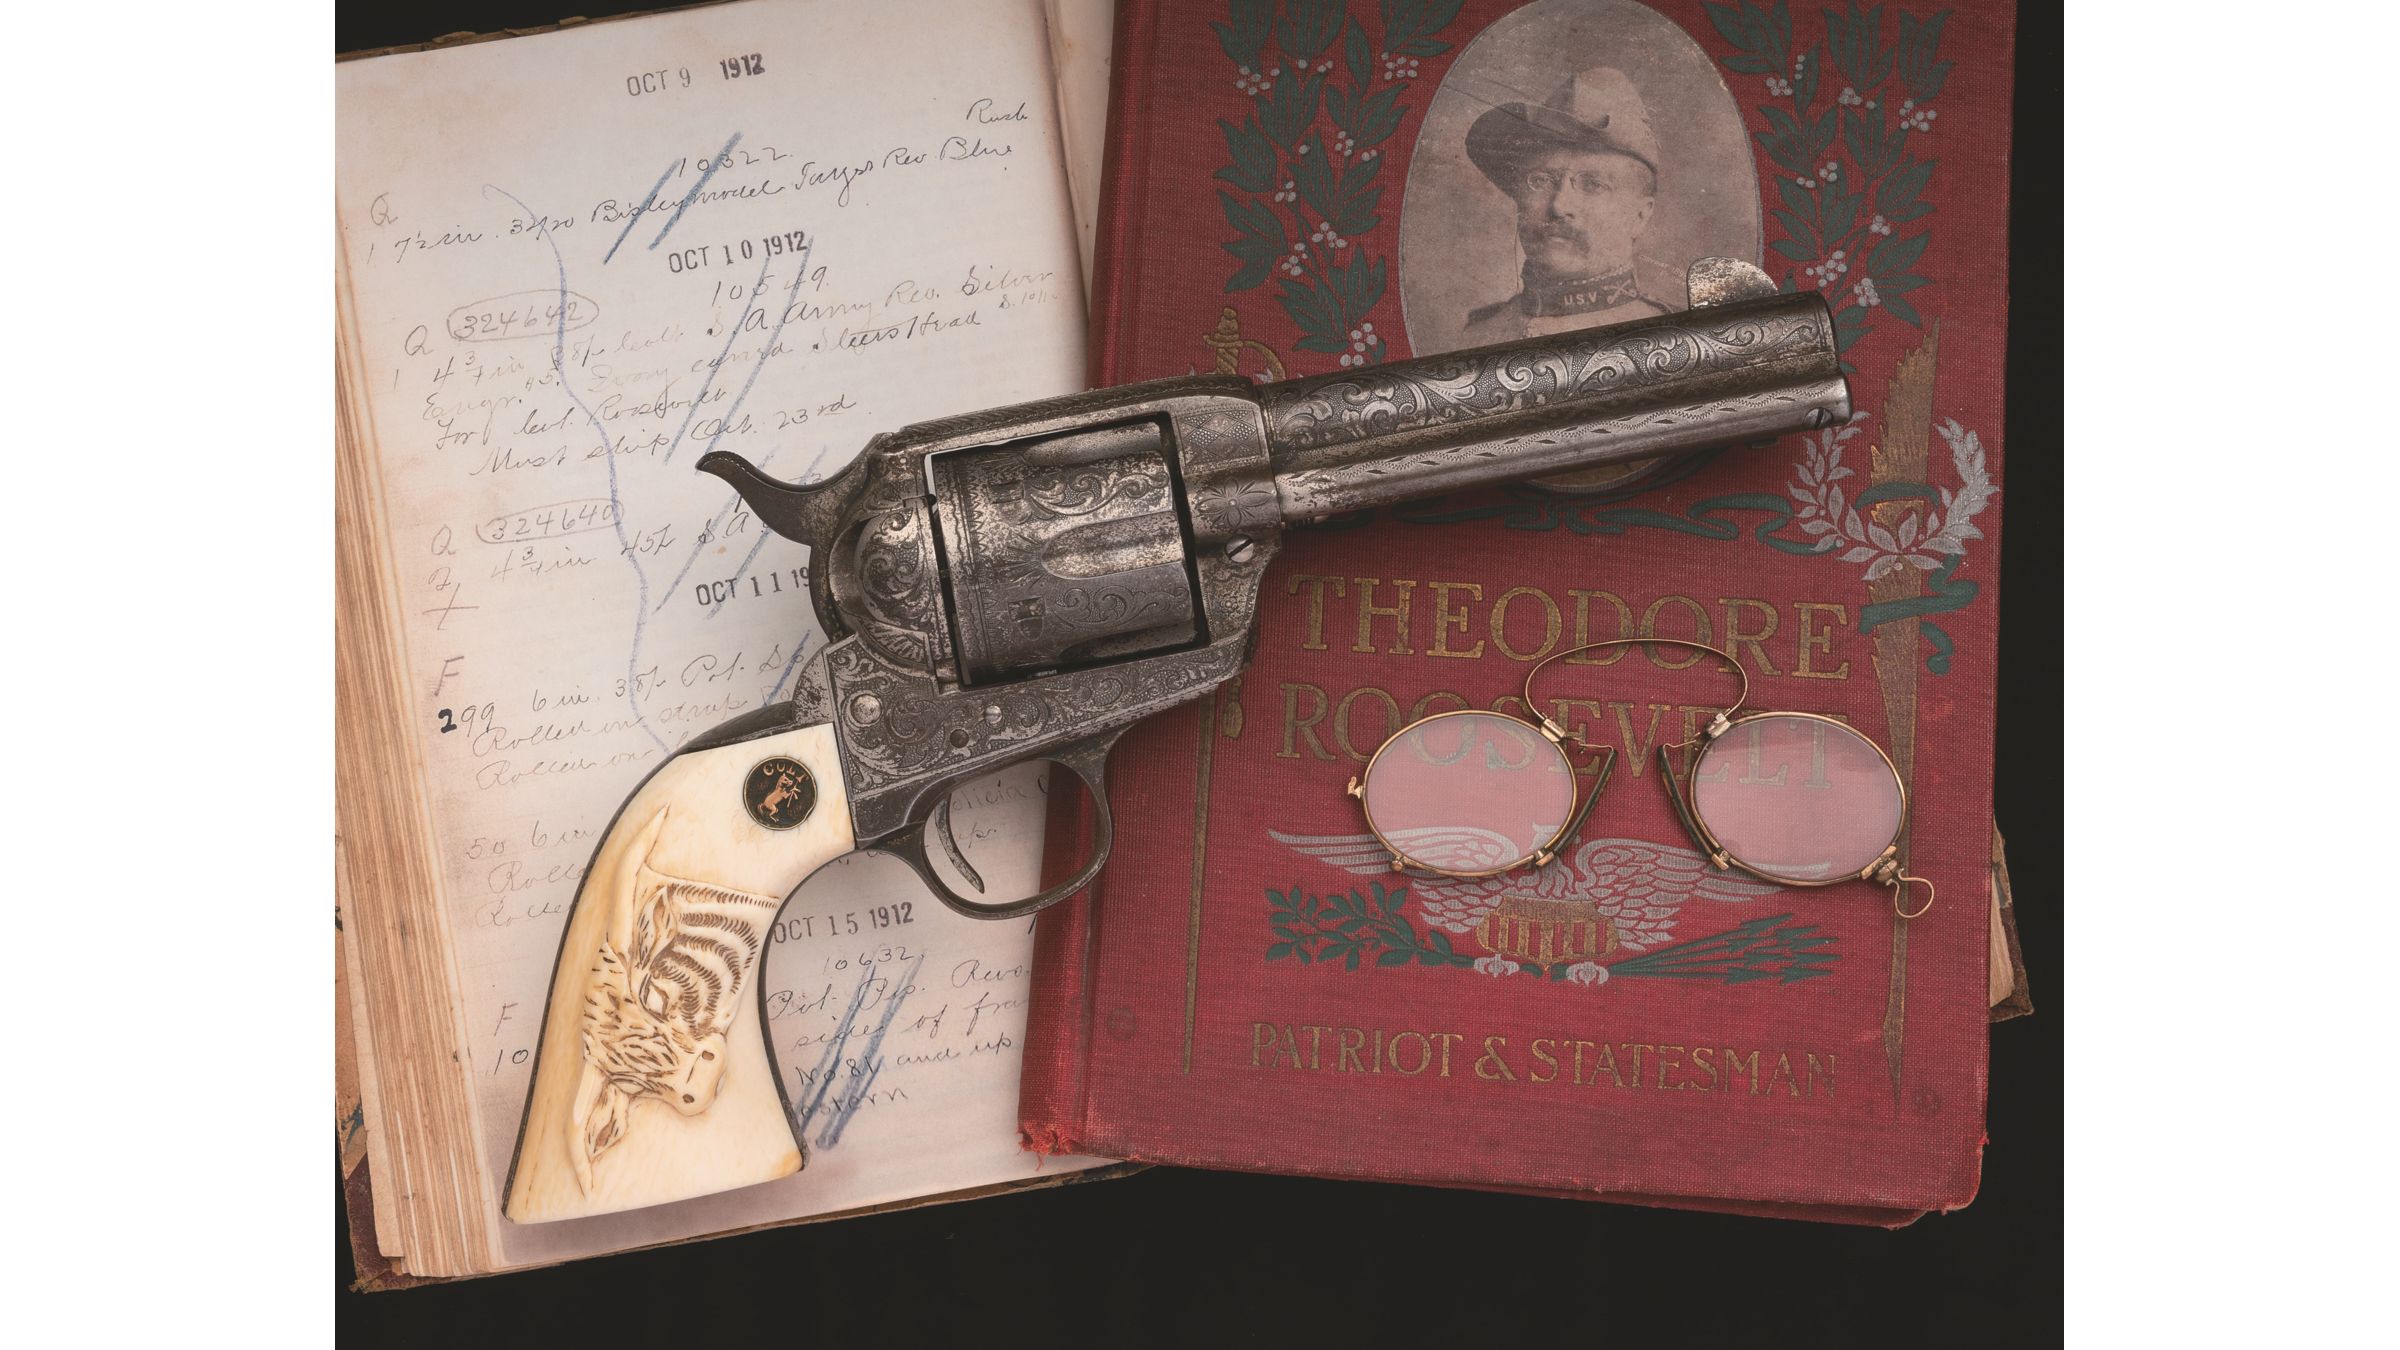 Theodore Roosevelt Factory Engraved Colt Single Action Revolver “The Bull Moose Colt Single Action”